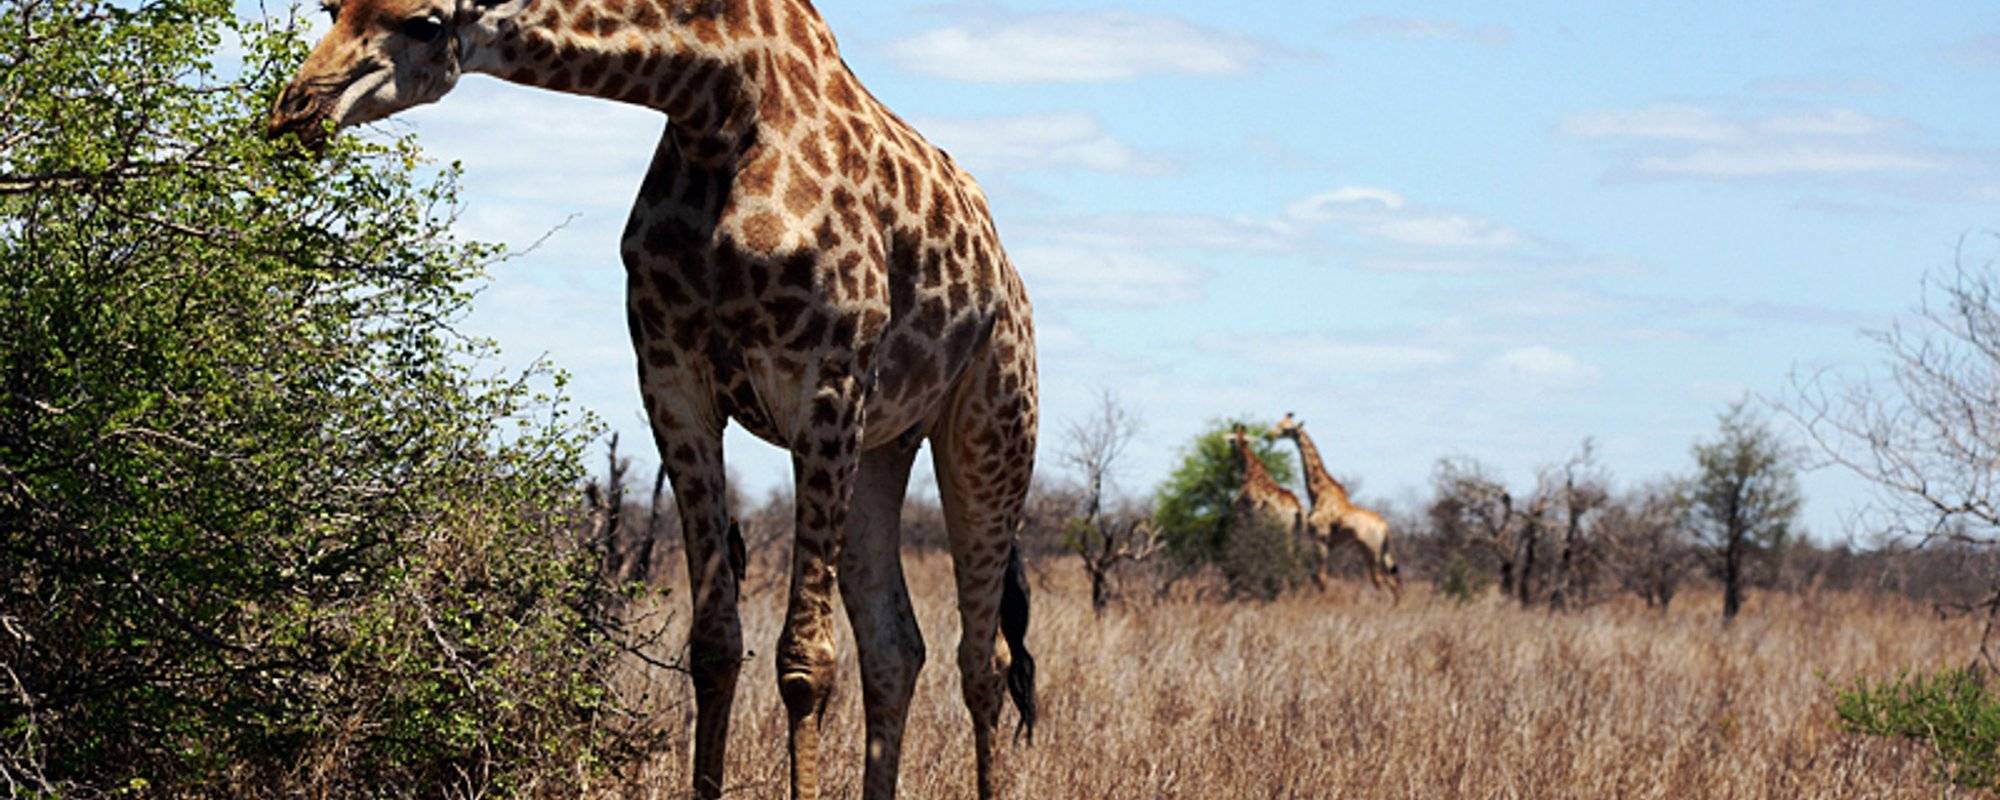 SOUTH-AFRICA: The giraffe just silently went to the list of endangered species